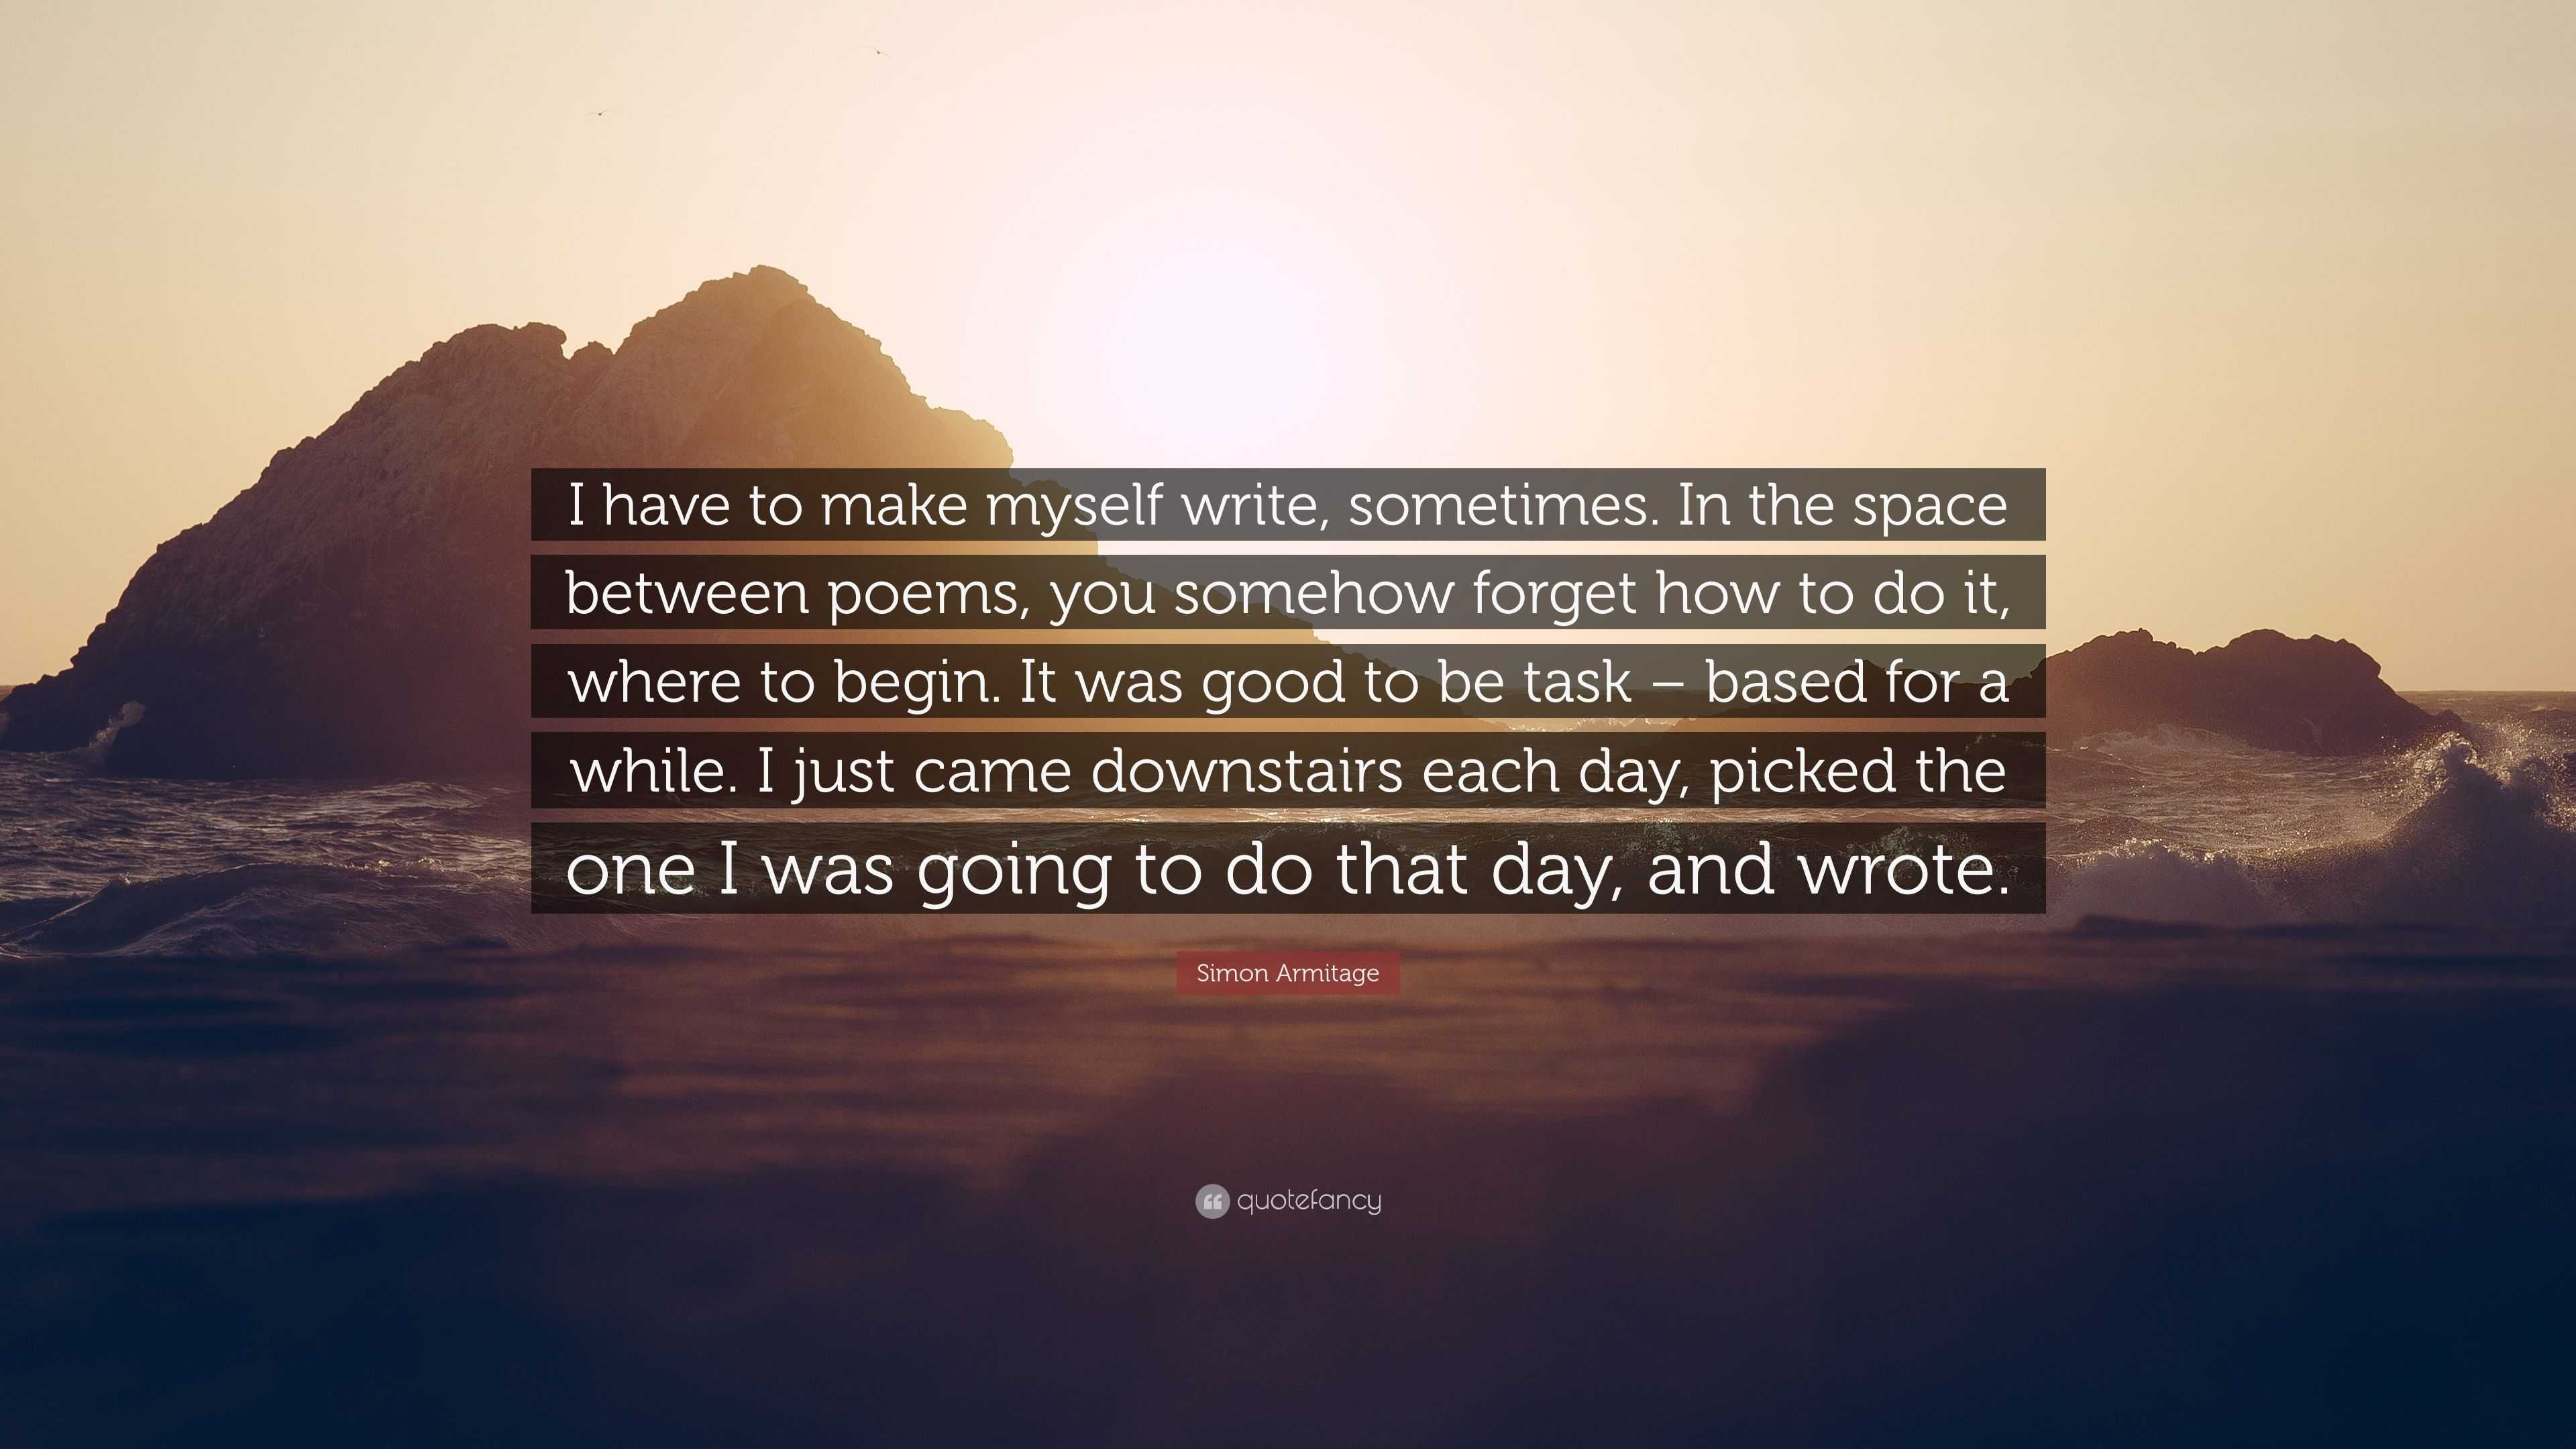 Simon Armitage Quote: “I have to make myself write, sometimes. In